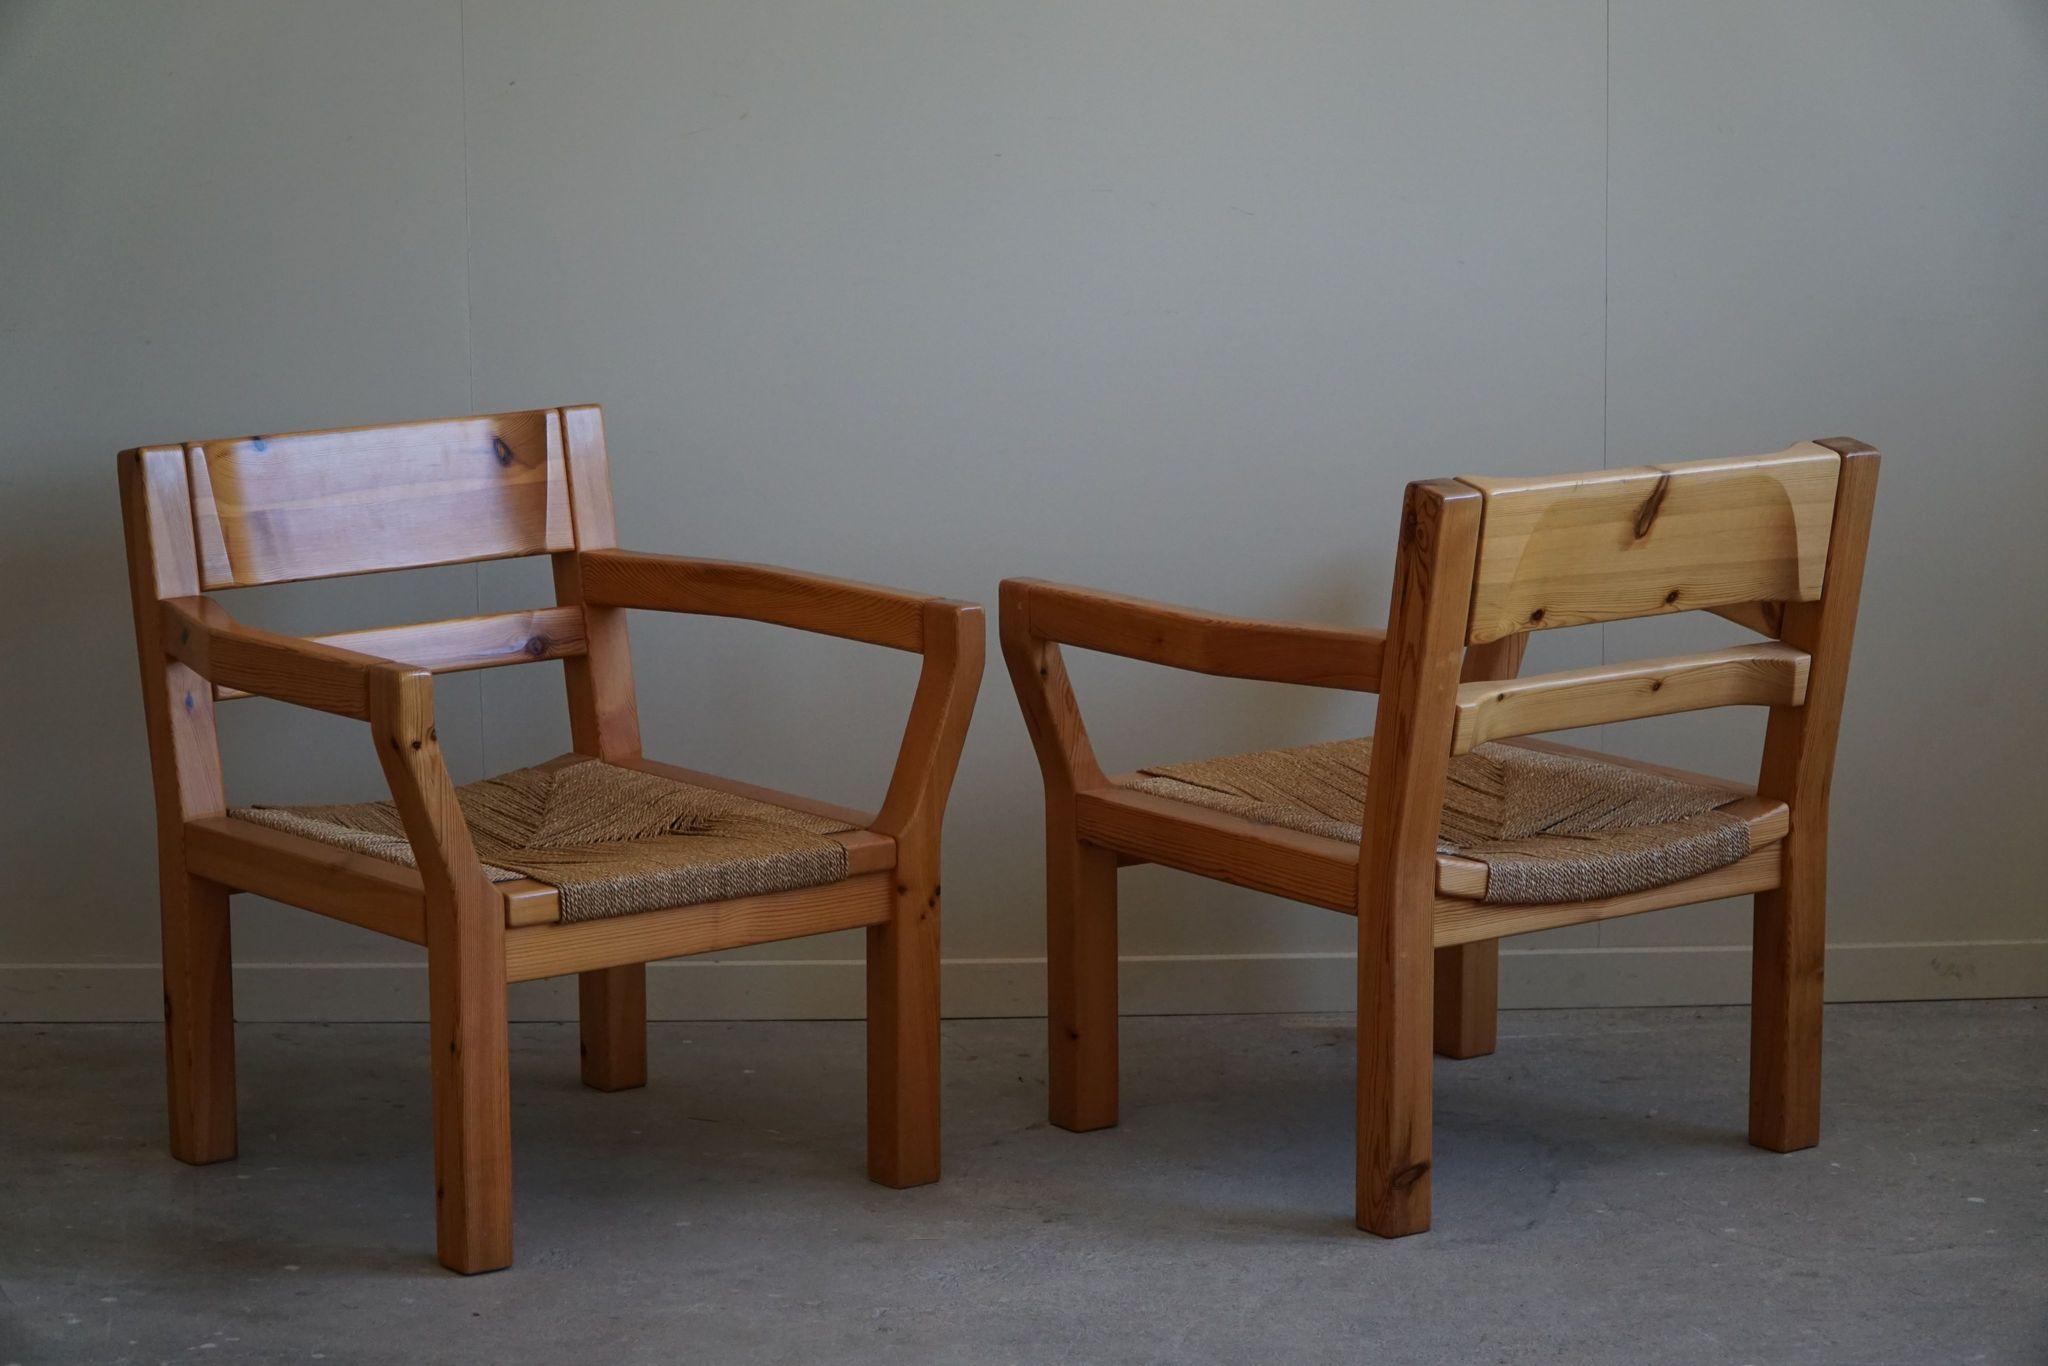 Tage Poulsen, A Pair of Brutalist Chairs in Pine & Cord, Danish Modern, 1970s For Sale 12